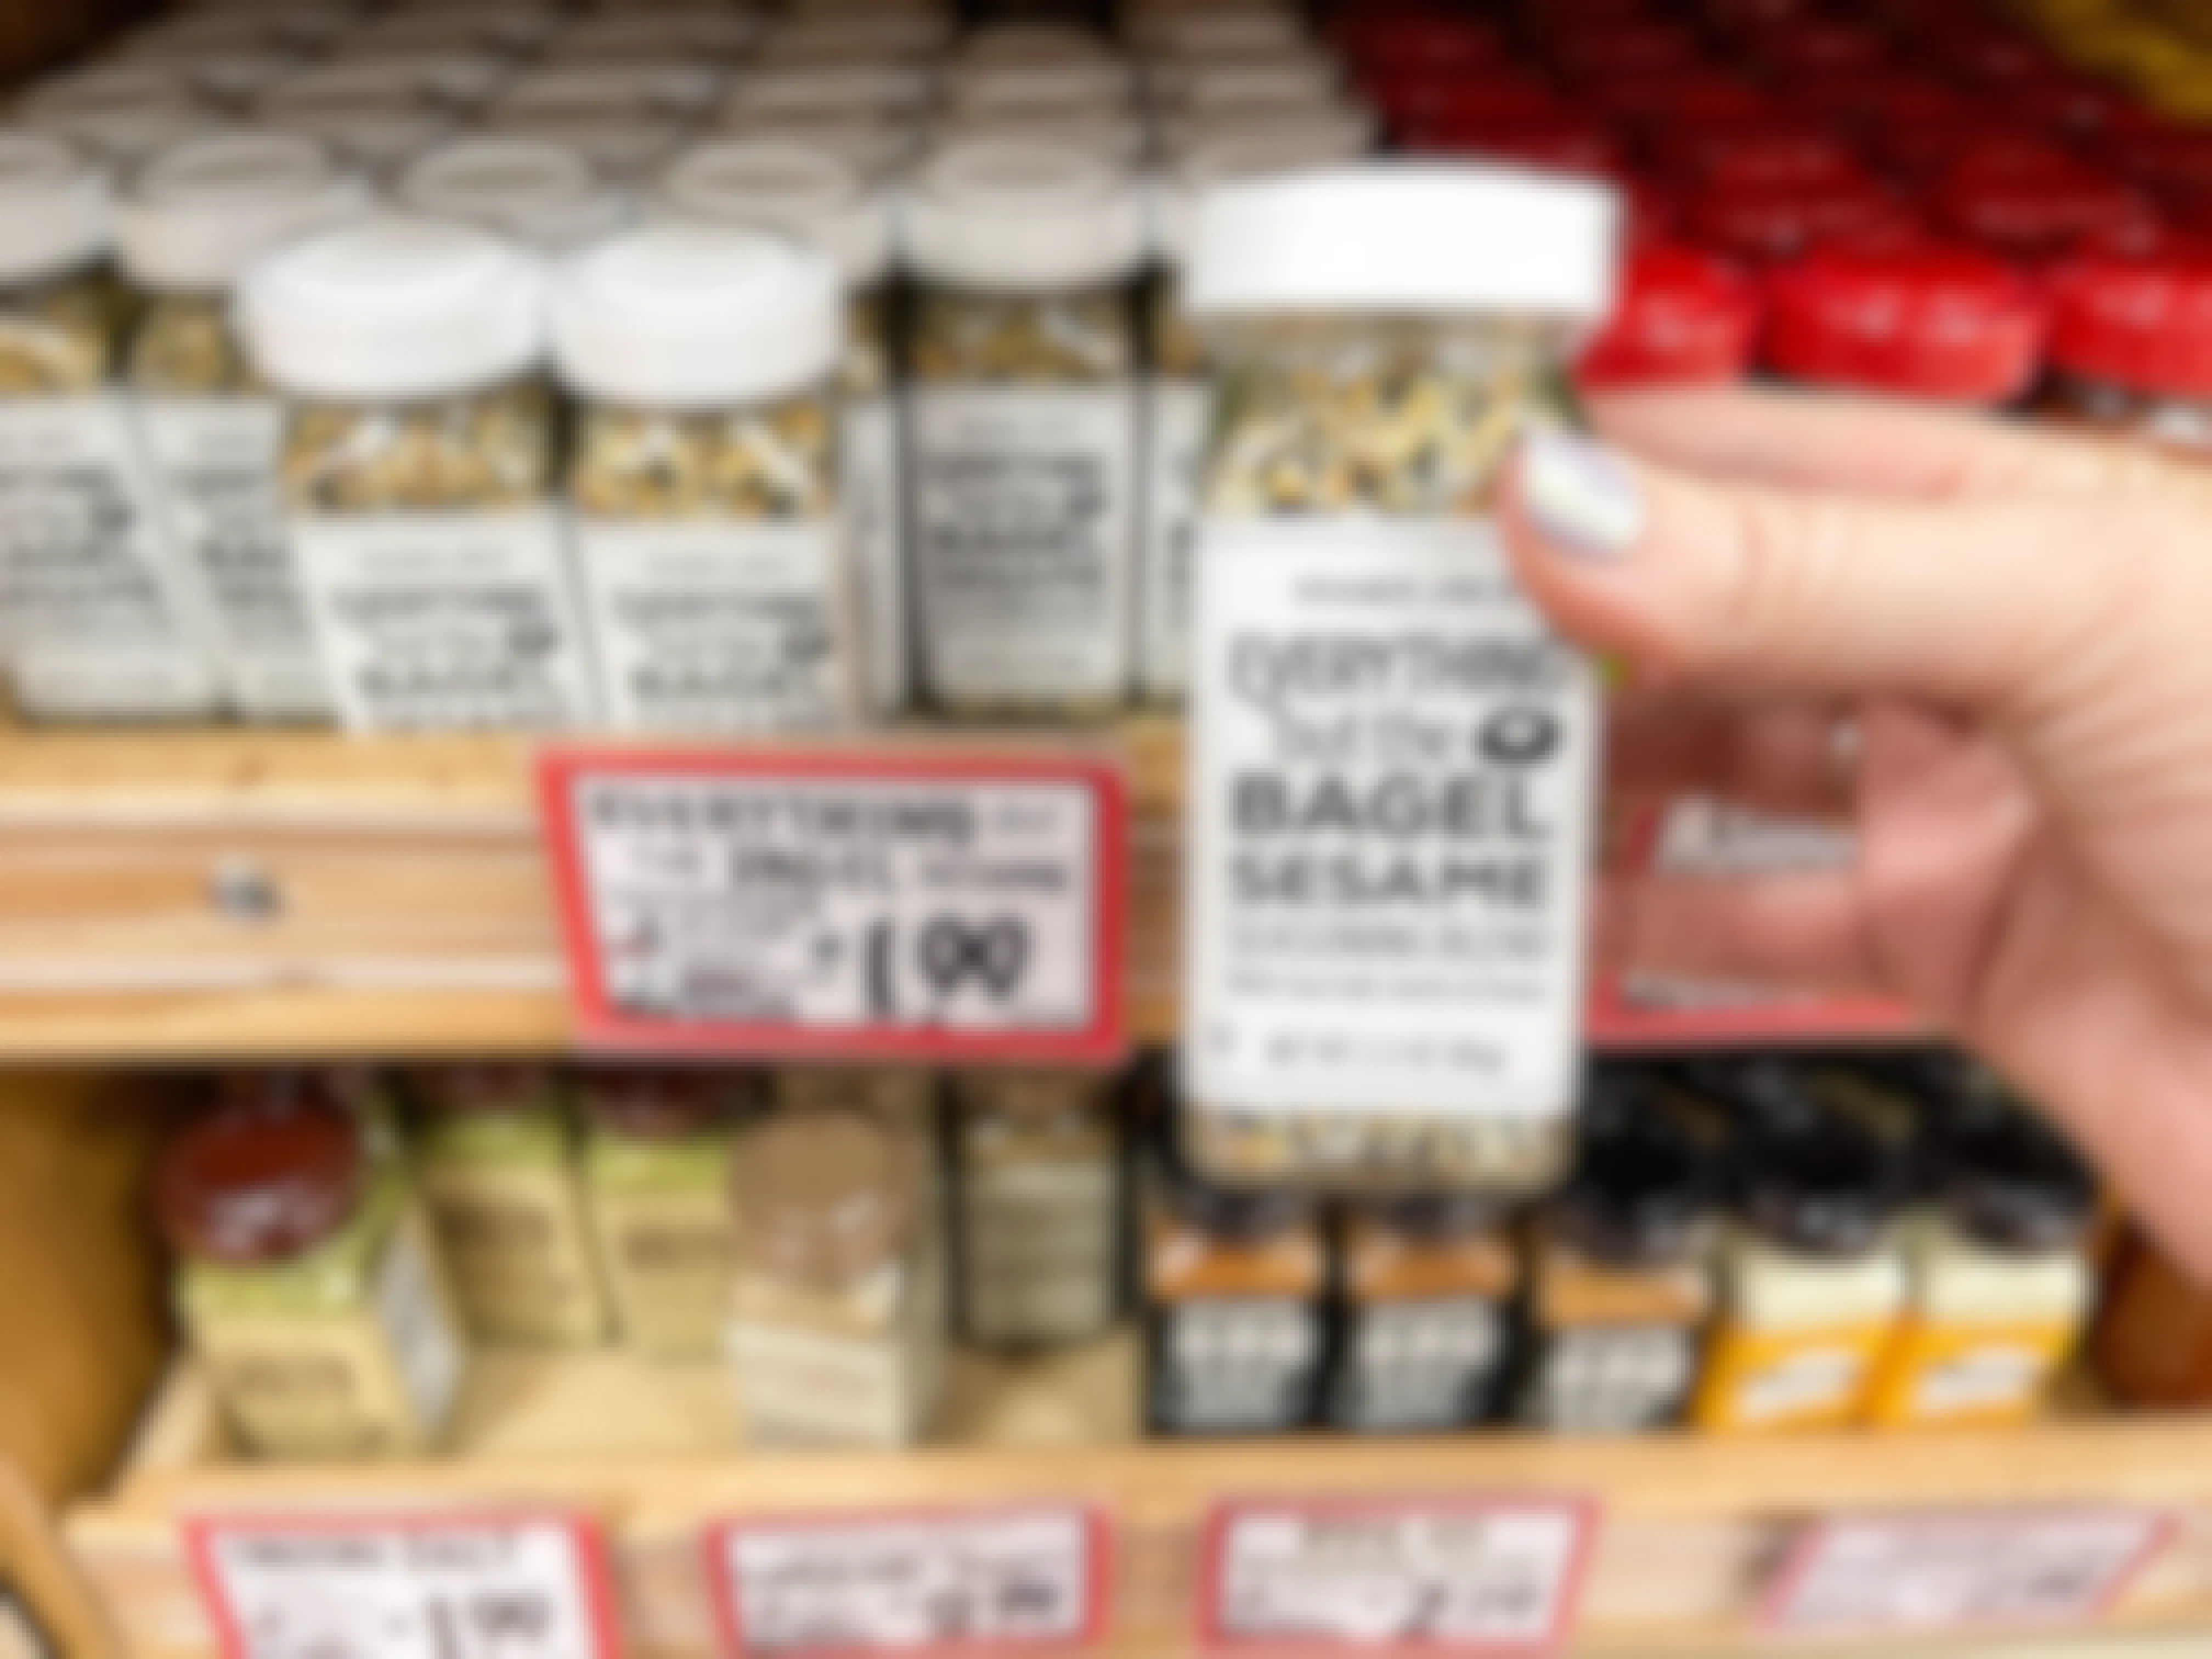 A person holding a container of Trader Joe's Everything but the Bagel Sesame Seasoning Blend in front of the seasonings shelf at Trader Joe's.